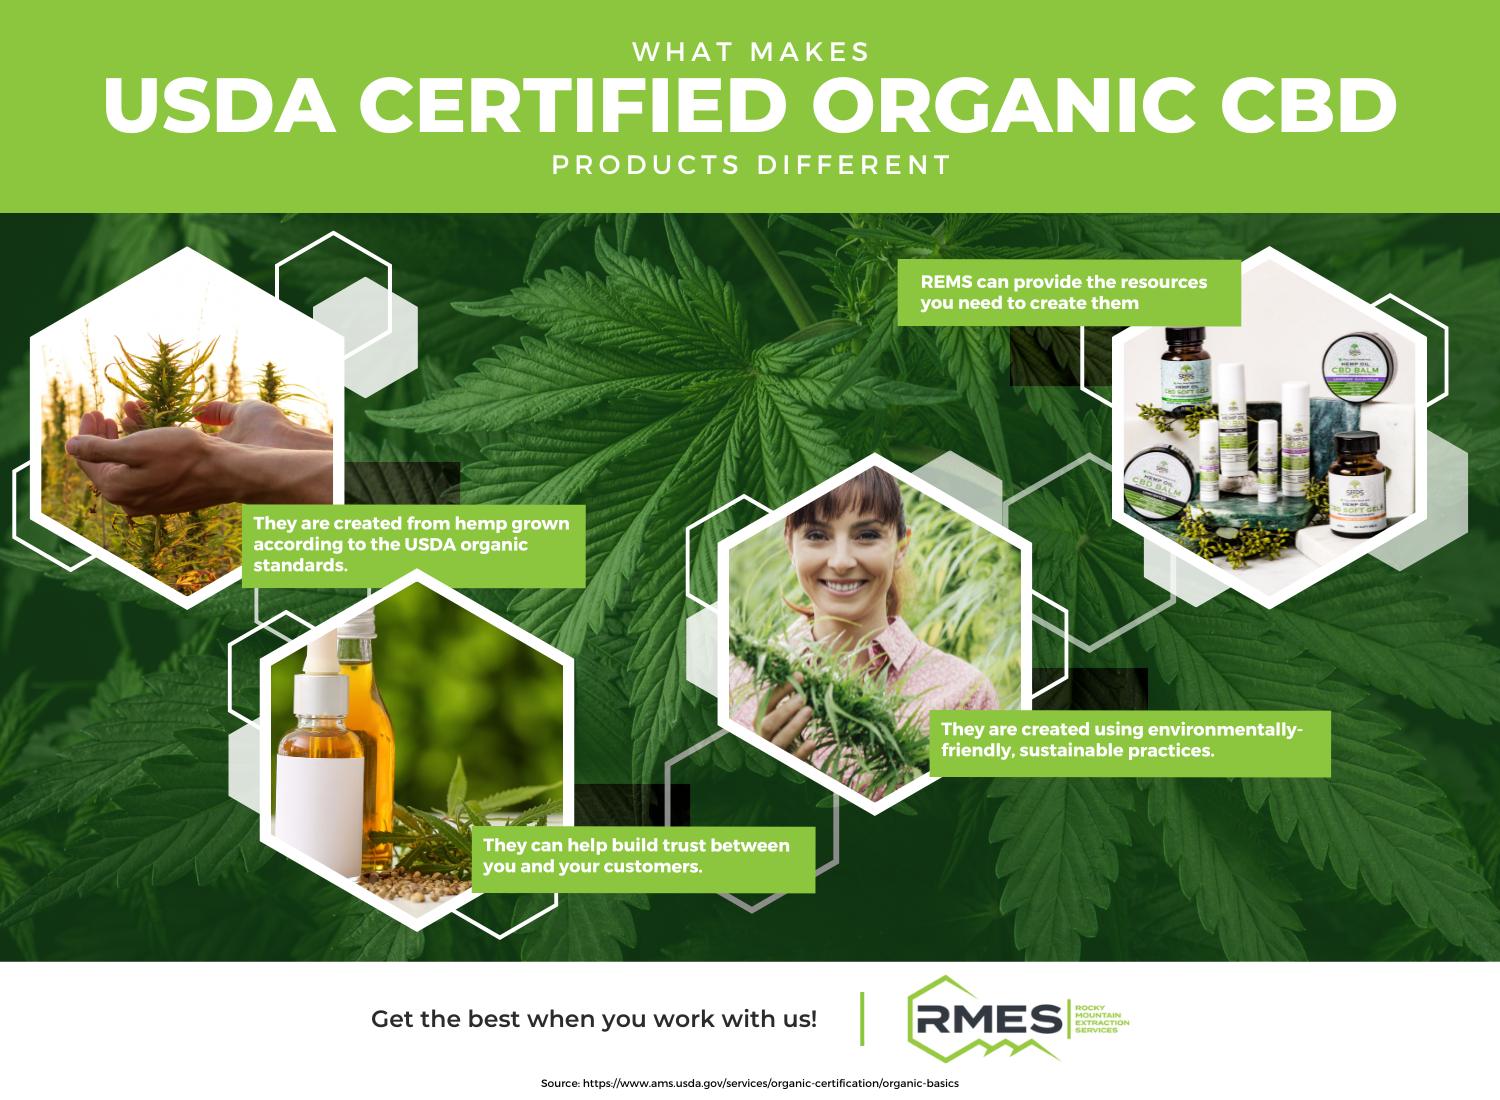 IG - What Makes USDA Certified Organic CBD Products Different